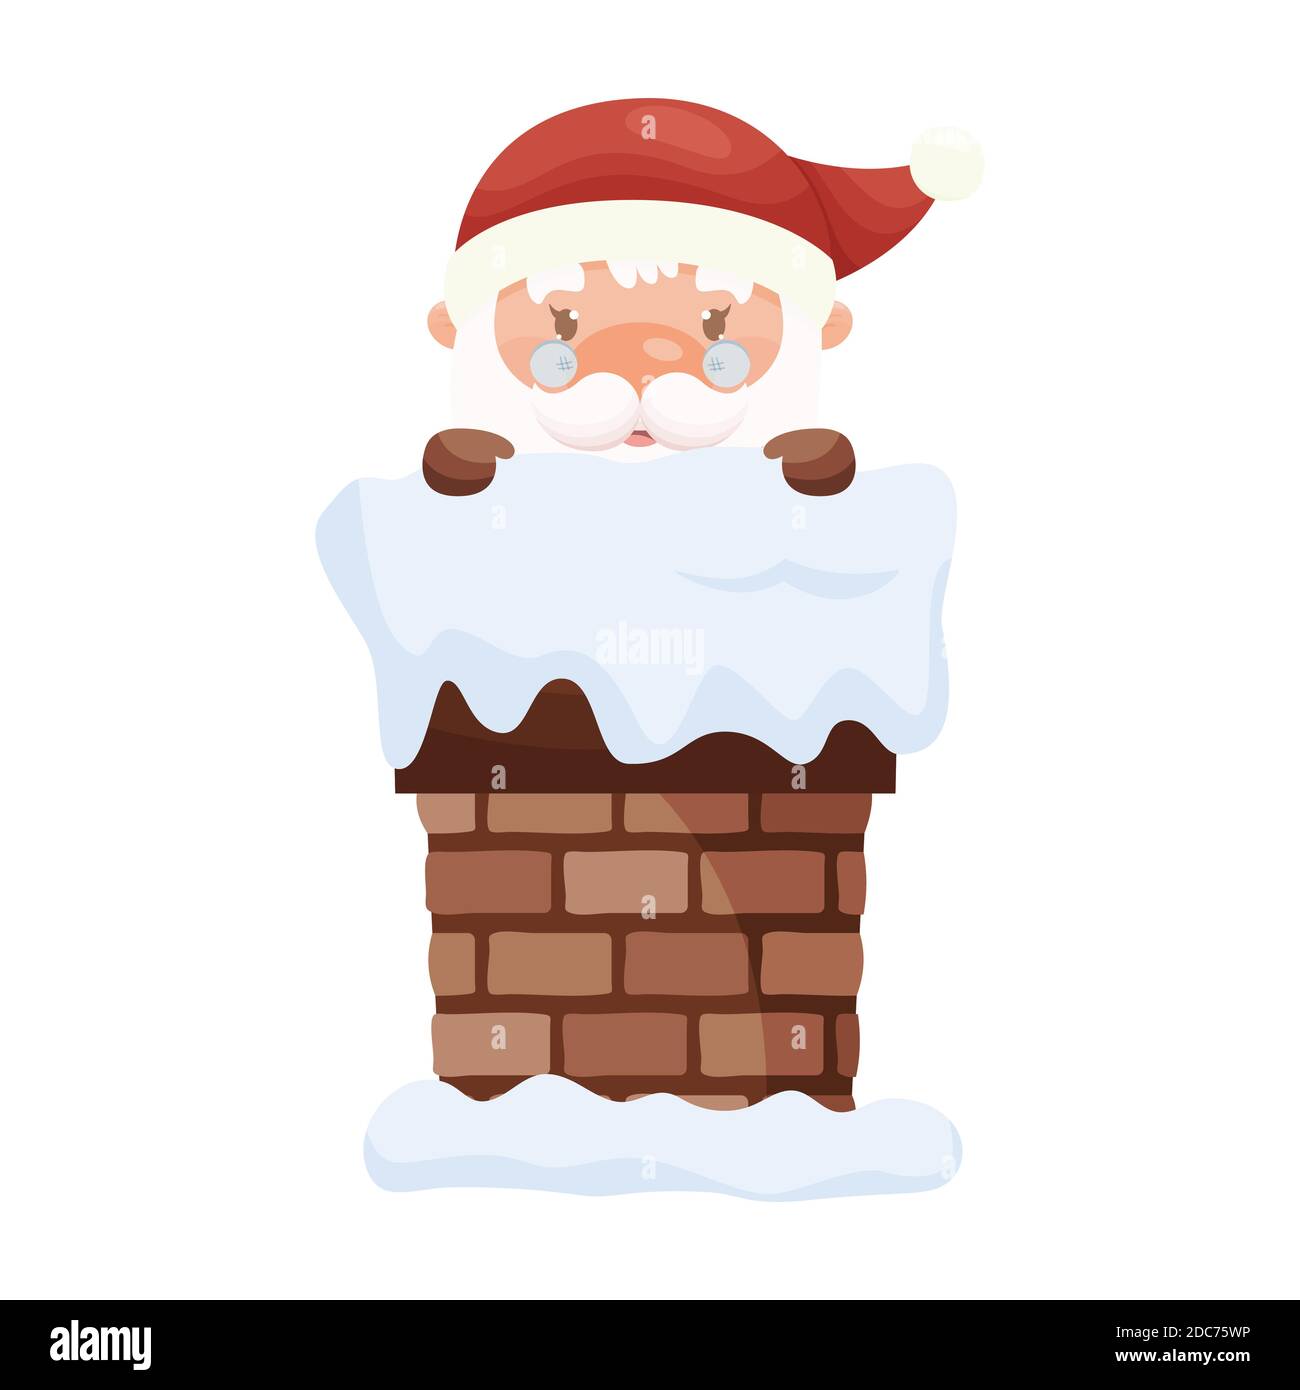 Cartoom cute Santa Claus character looking out from the chimney. Vector illustration Stock Vector